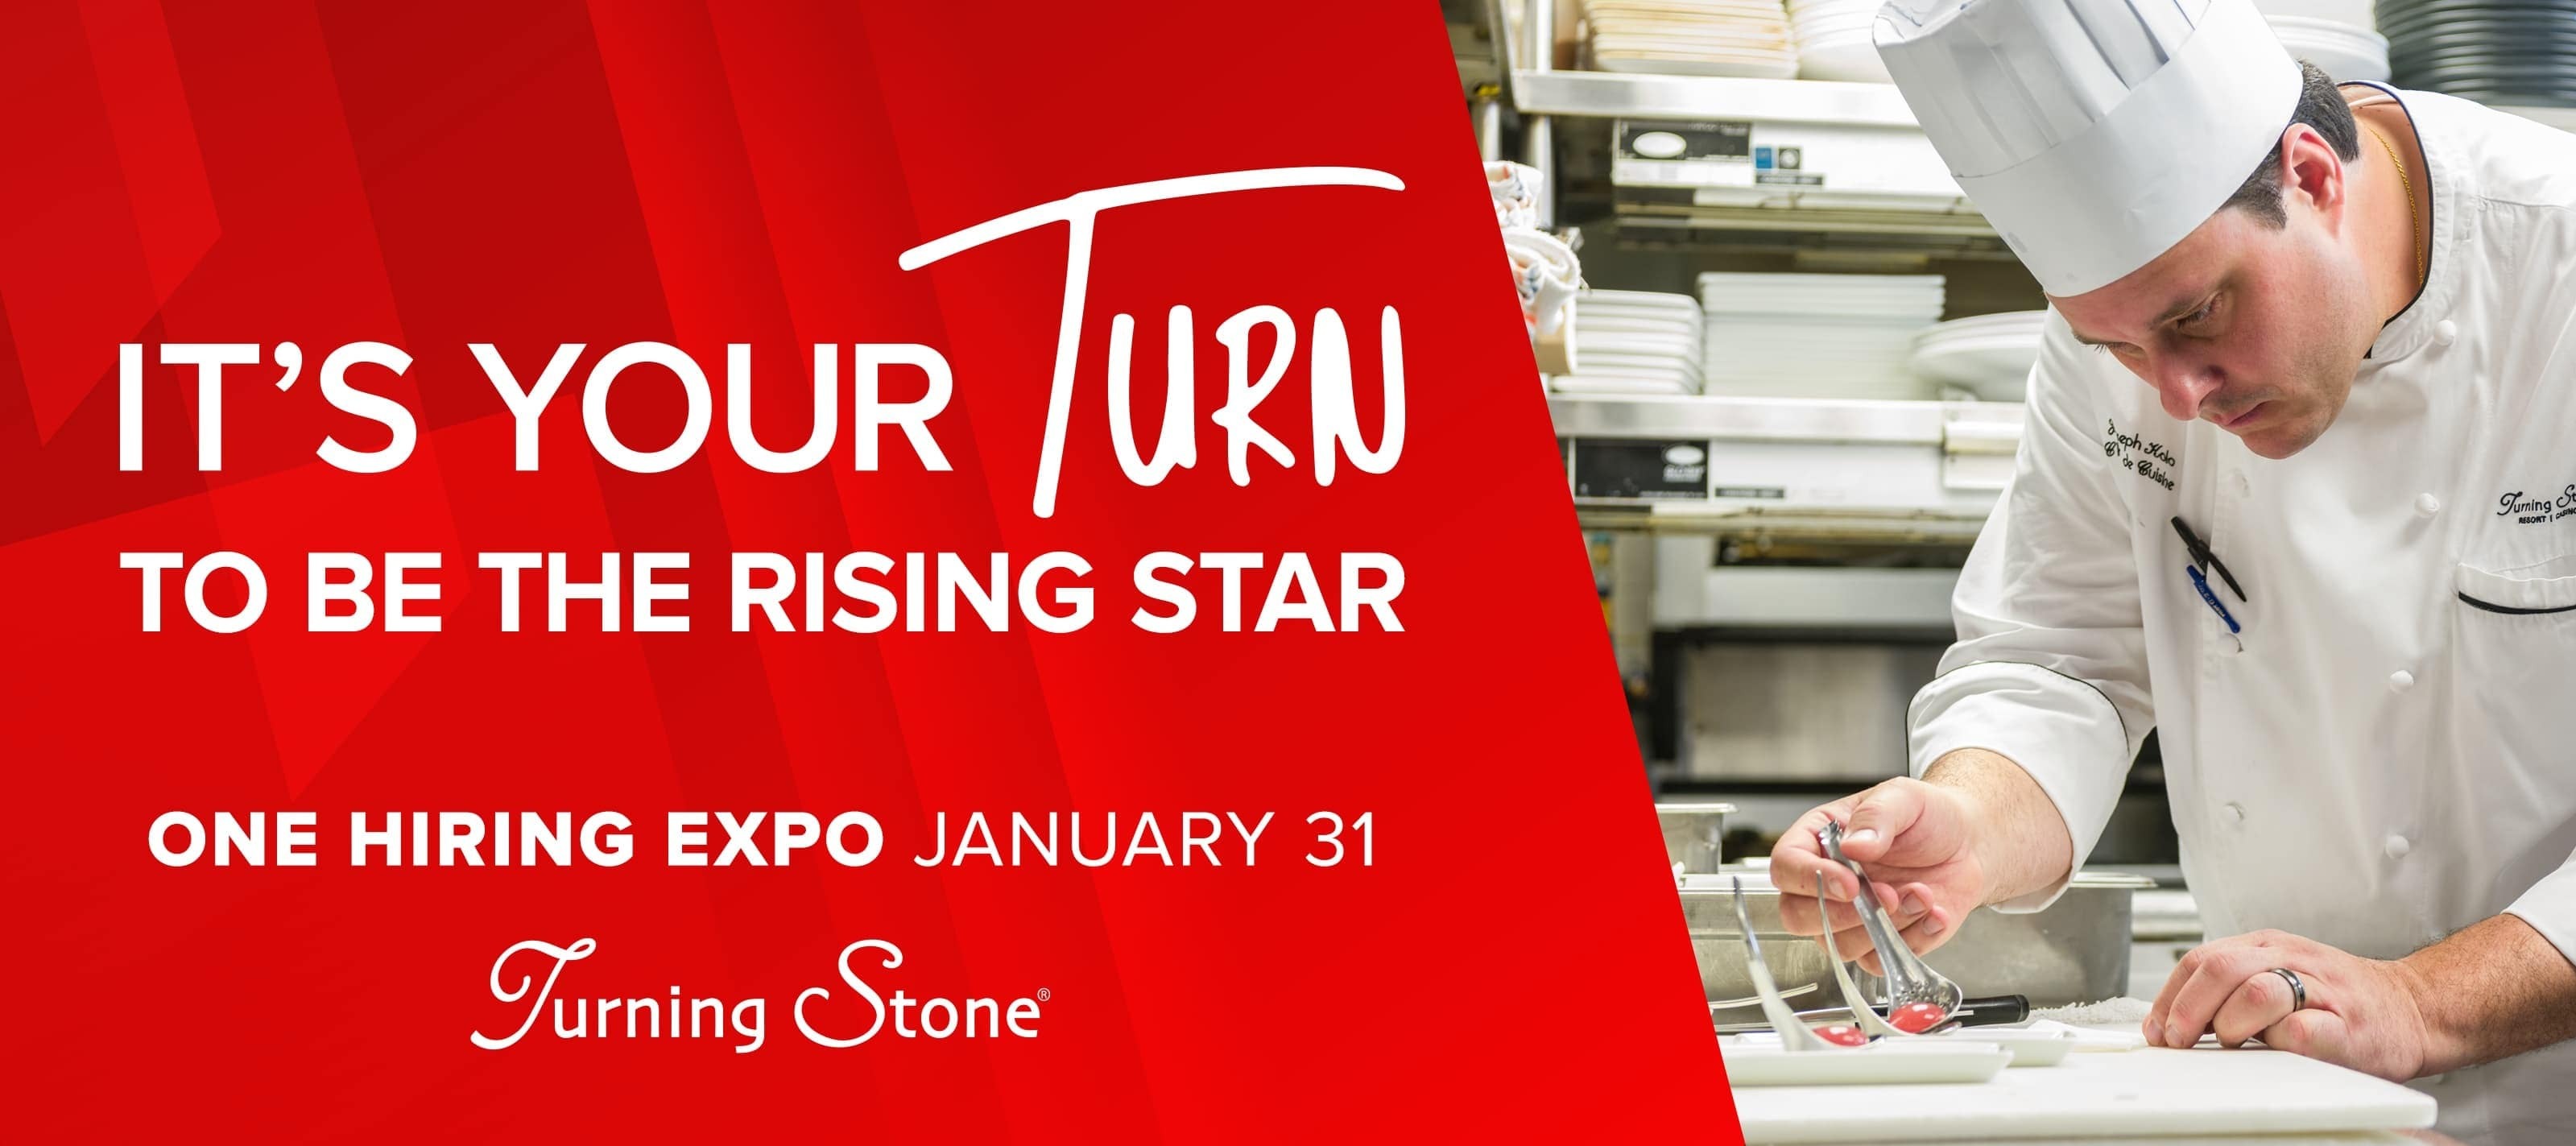 its your turn to be the rising star one hiring expo january 31 turning stone